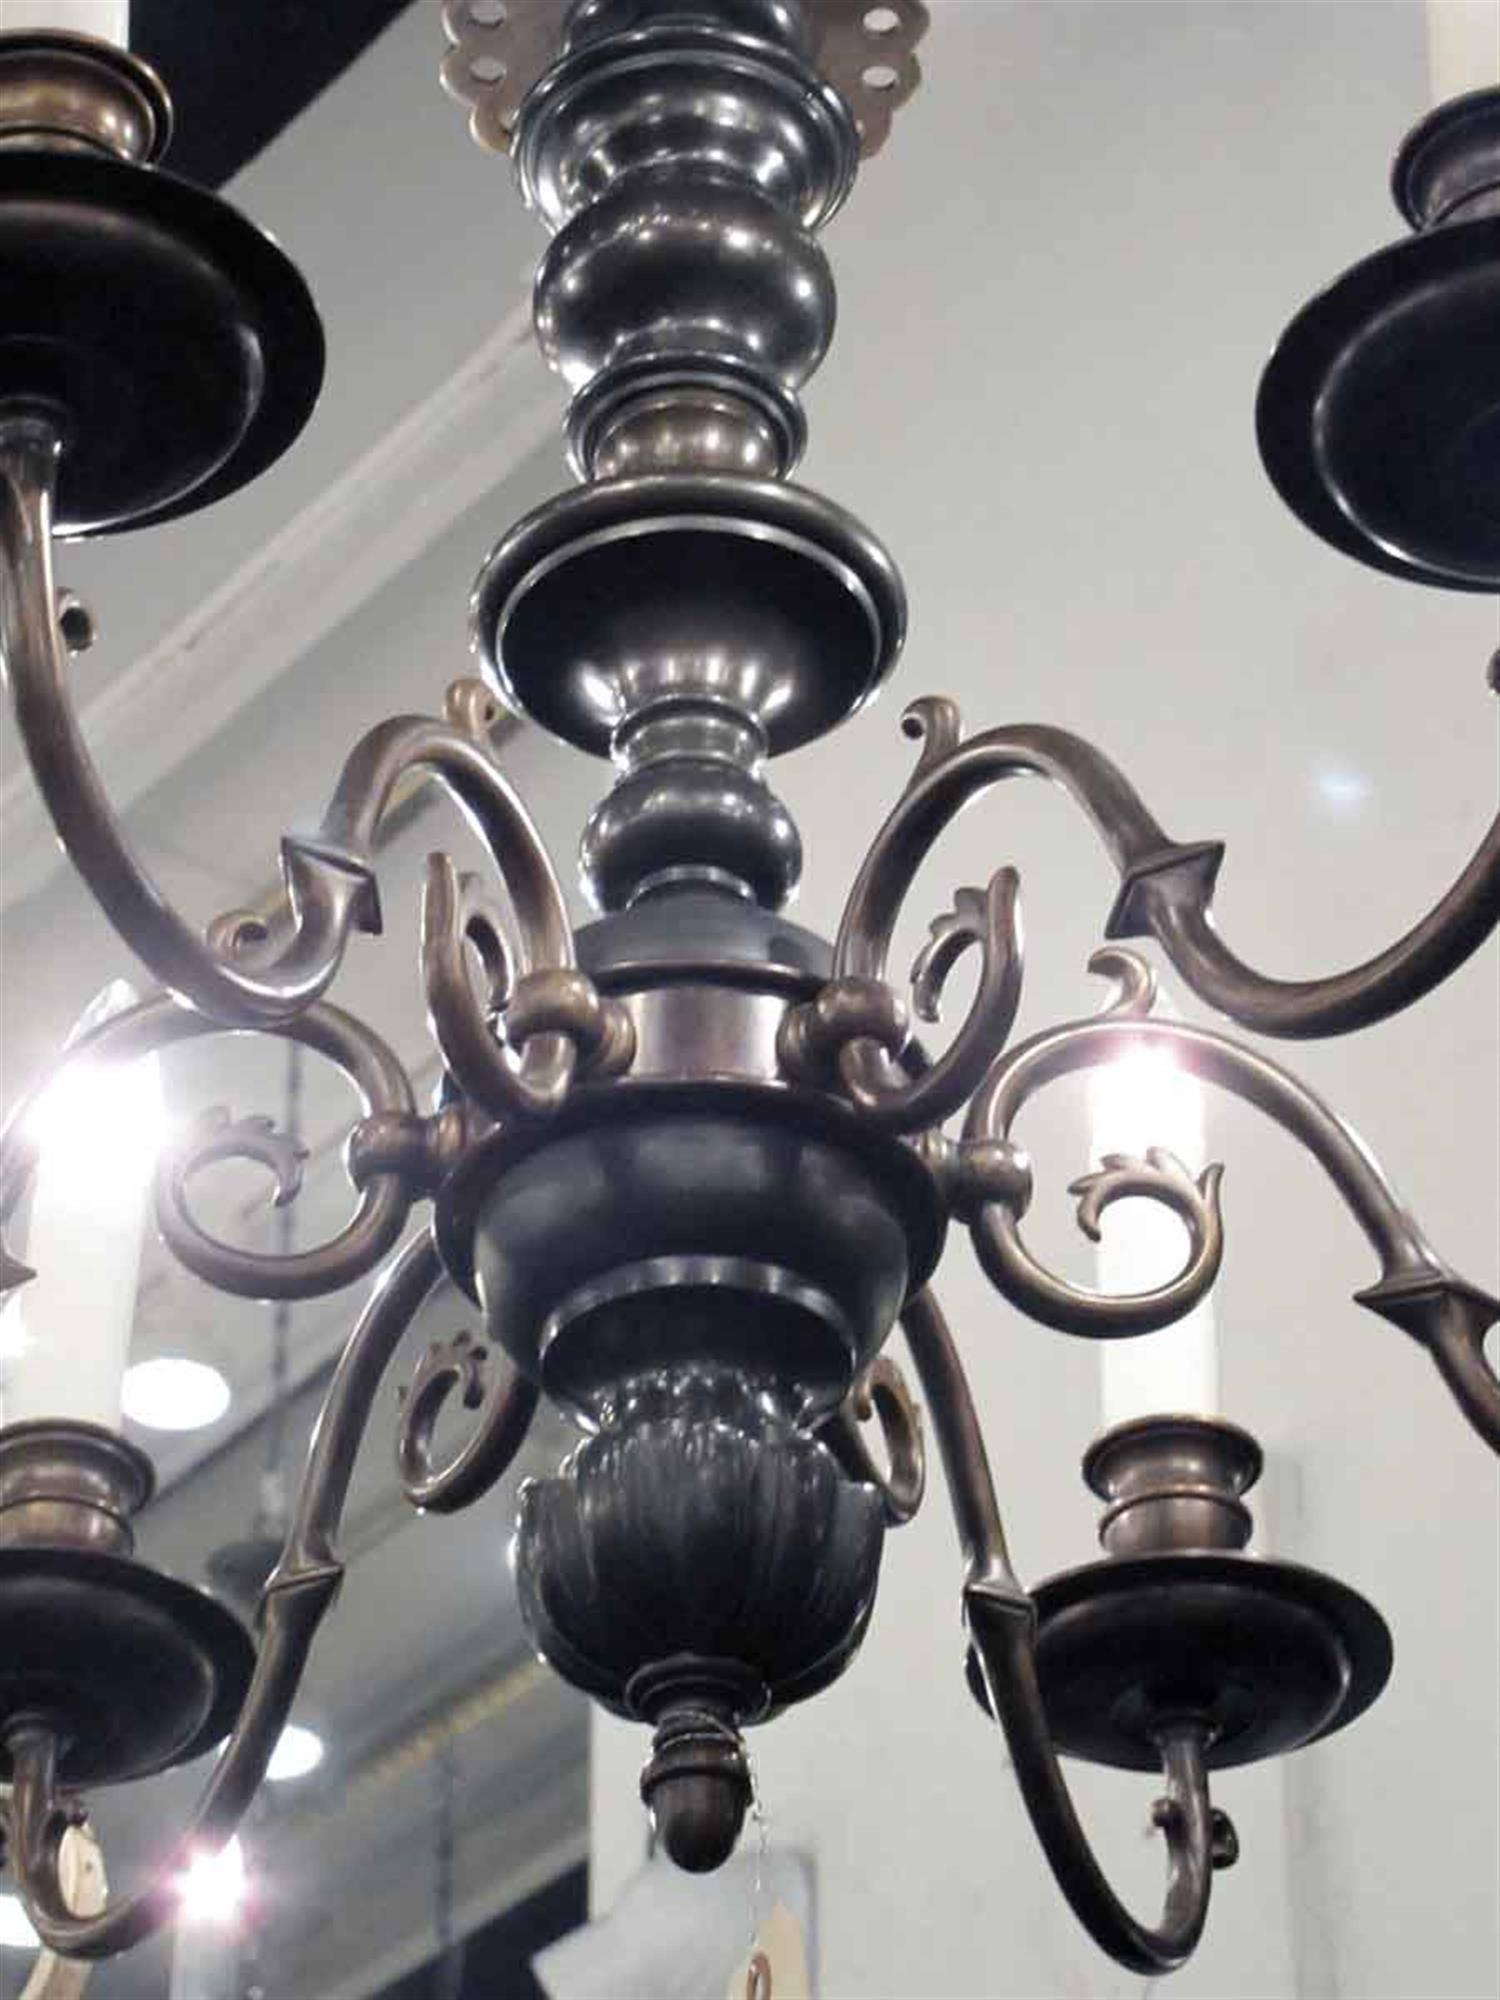 1930s oil rubbed bronze finished chandelier with six arms. Cleane and rewired. Please note, this item is located in one of our NYC locations.